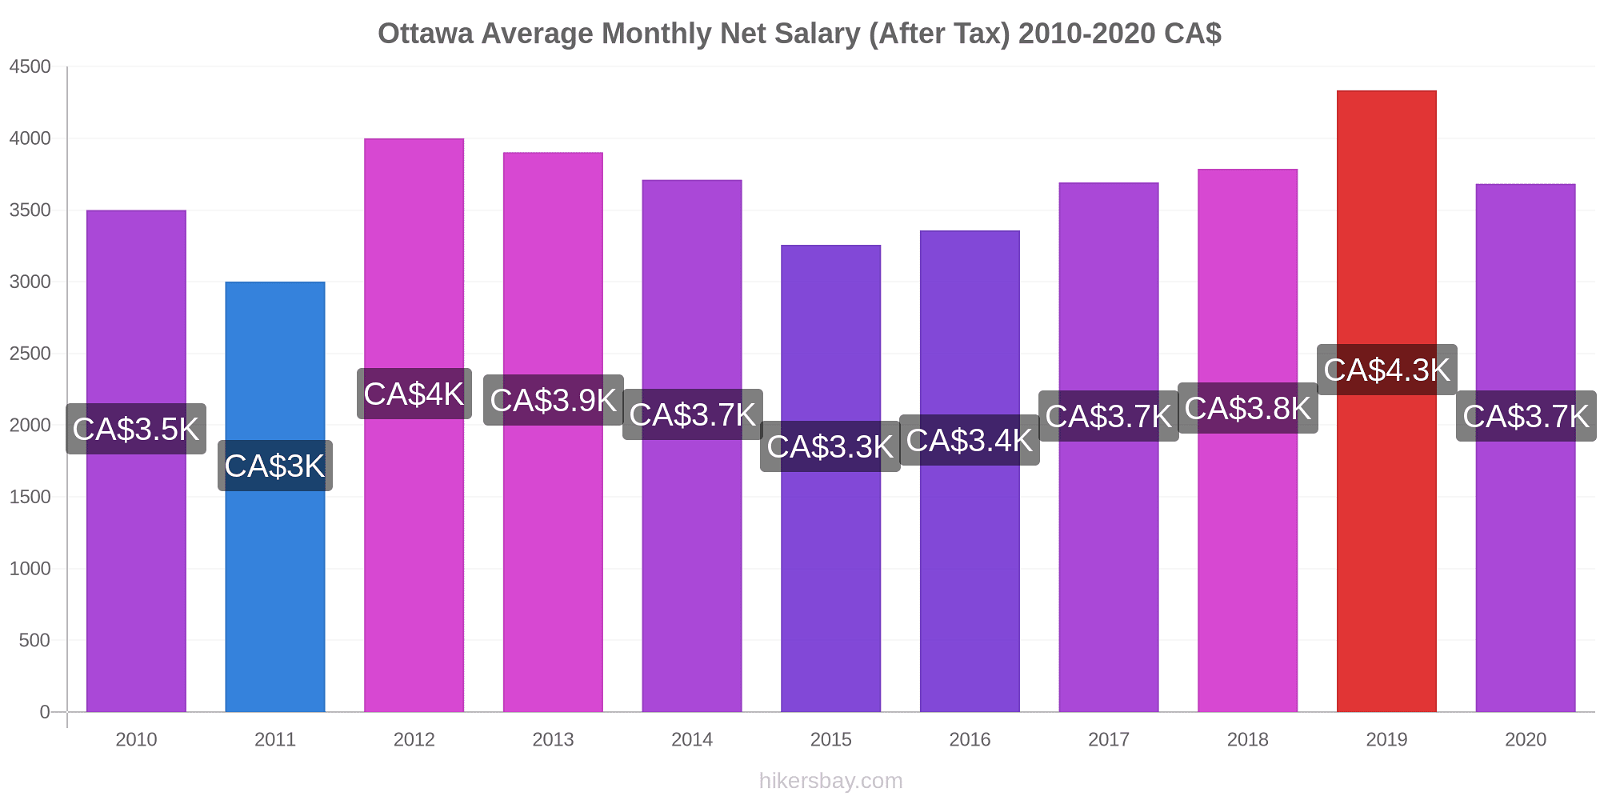 Ottawa price changes Average Monthly Net Salary (After Tax) hikersbay.com